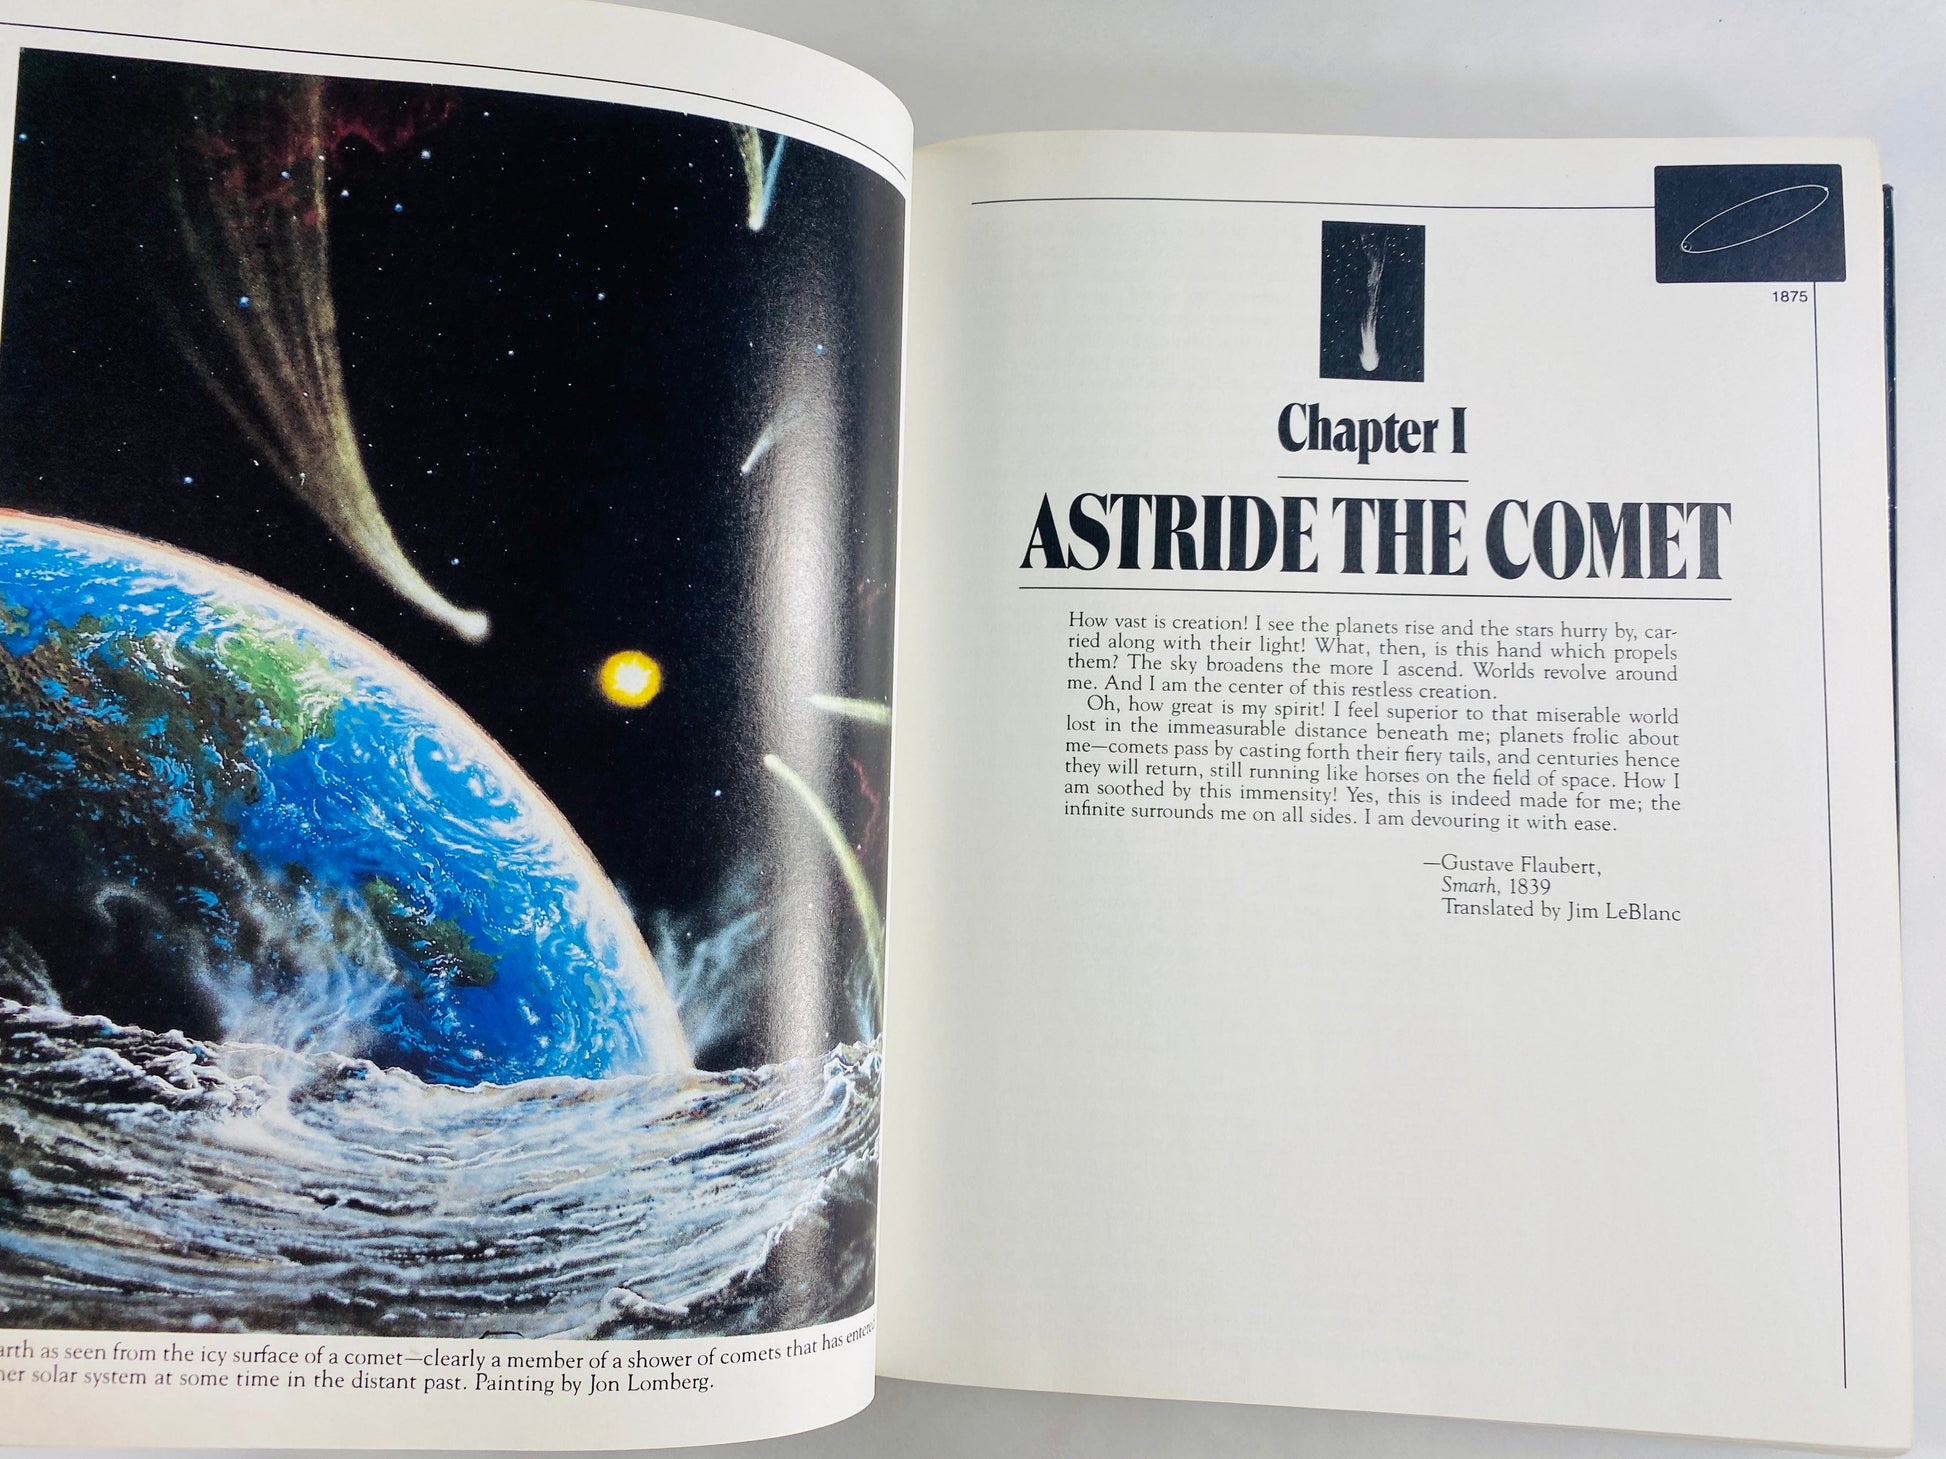 Comet vintage book circa 1985 by Carl Sagan author or Cosmos Astronomy cosmology astrophysicist astrobiology science. Gift